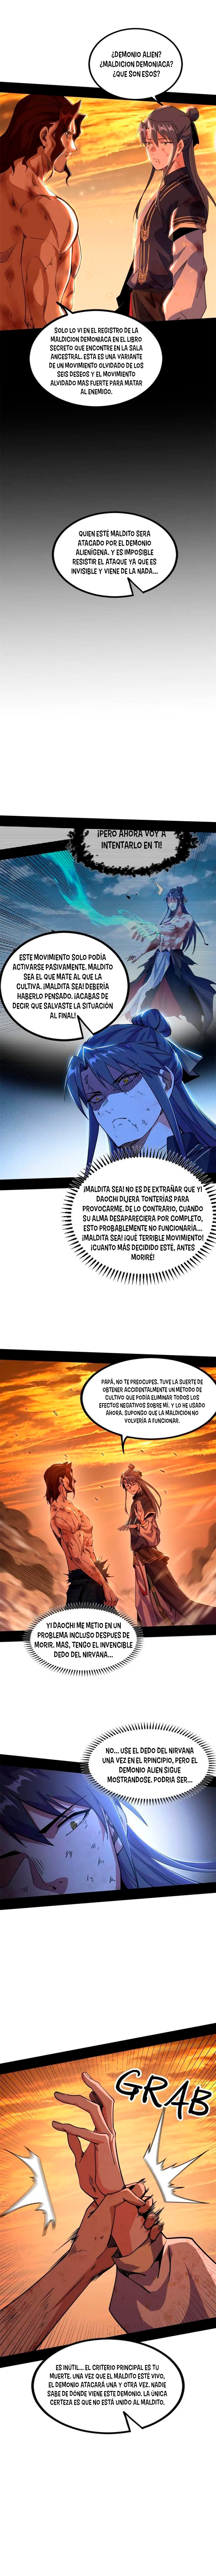 Manga Soy un dios maligno Chapter 310 image number 3